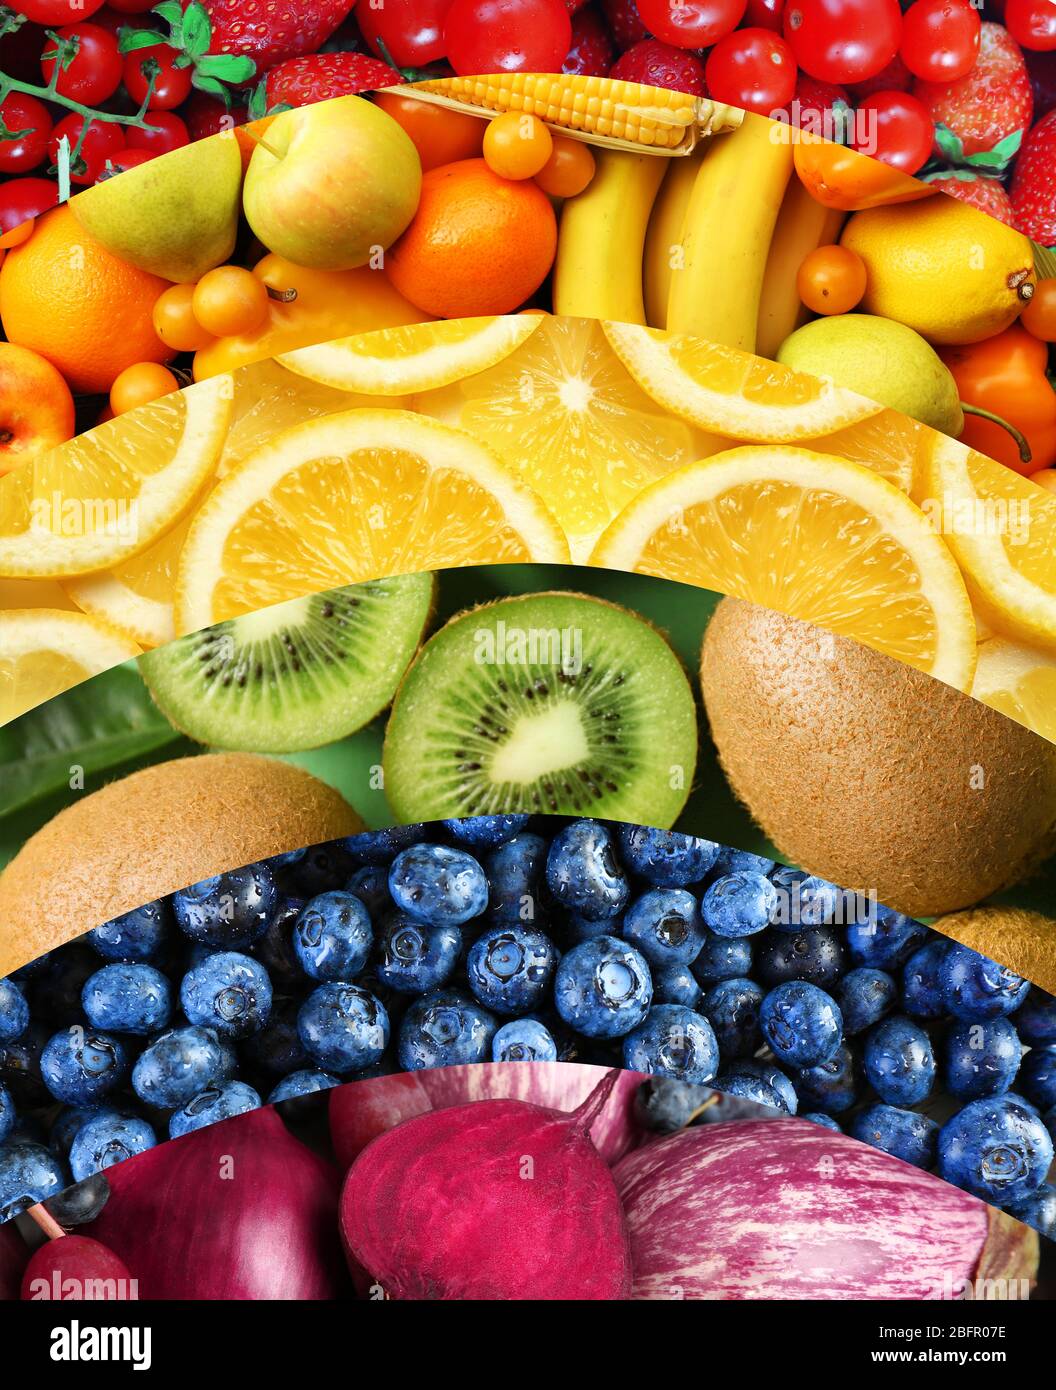 Collage of different fruits, vegetable and berries Stock Photo